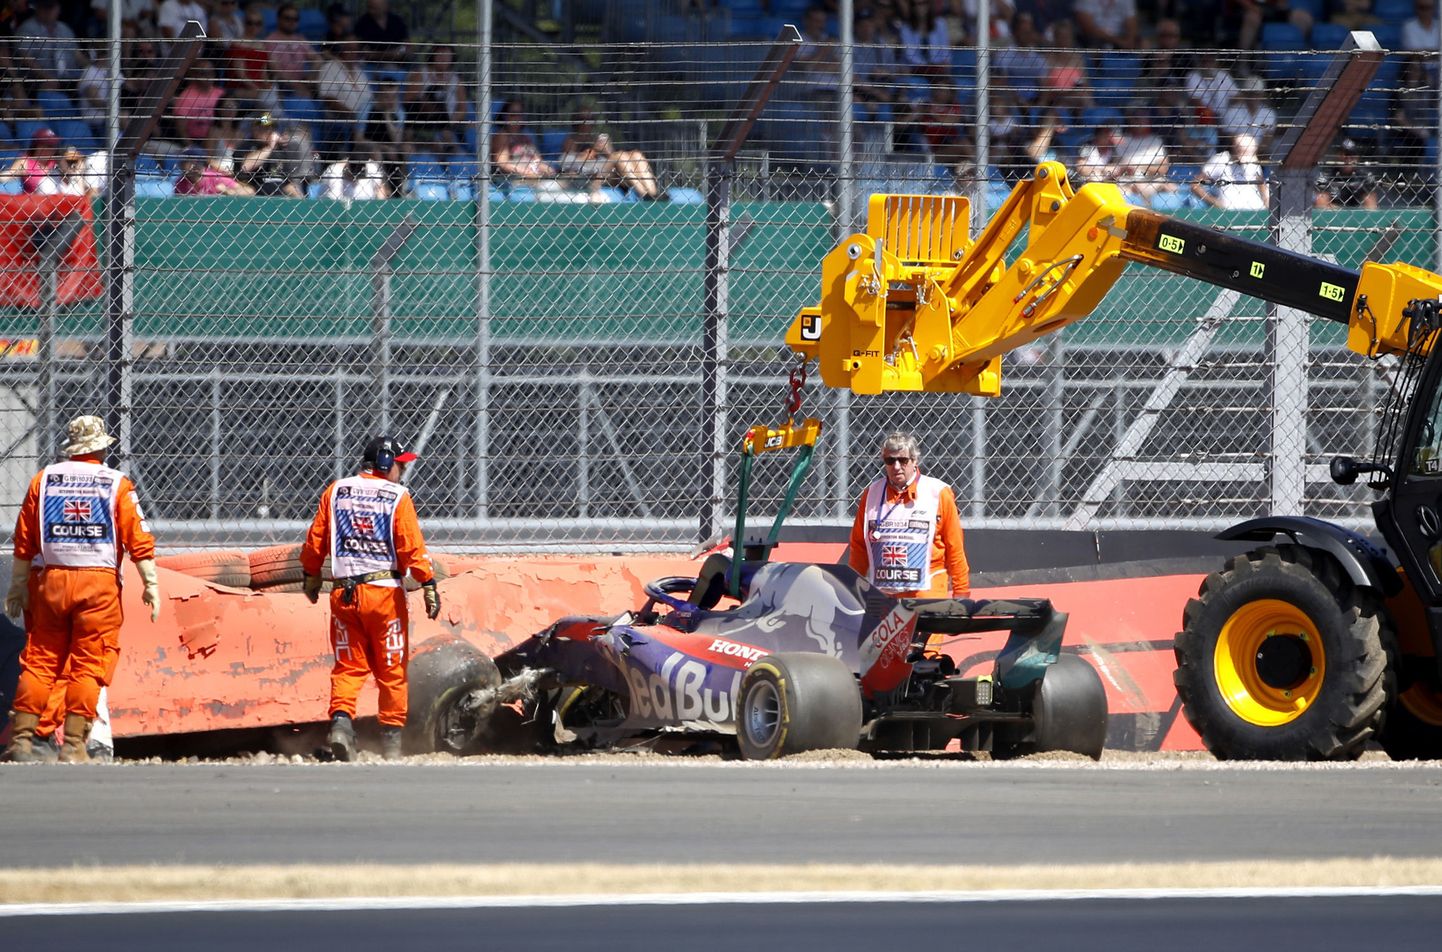 Brendon Hartley's Toro Rosso car is removed from the track after crashing out during third free practice at the Silverstone racetrack, Silverstone, England, Saturday, July 7, 2018. The British Formula One Grand Prix will be held on Sunday.(Martin Rickett/PA via AP)